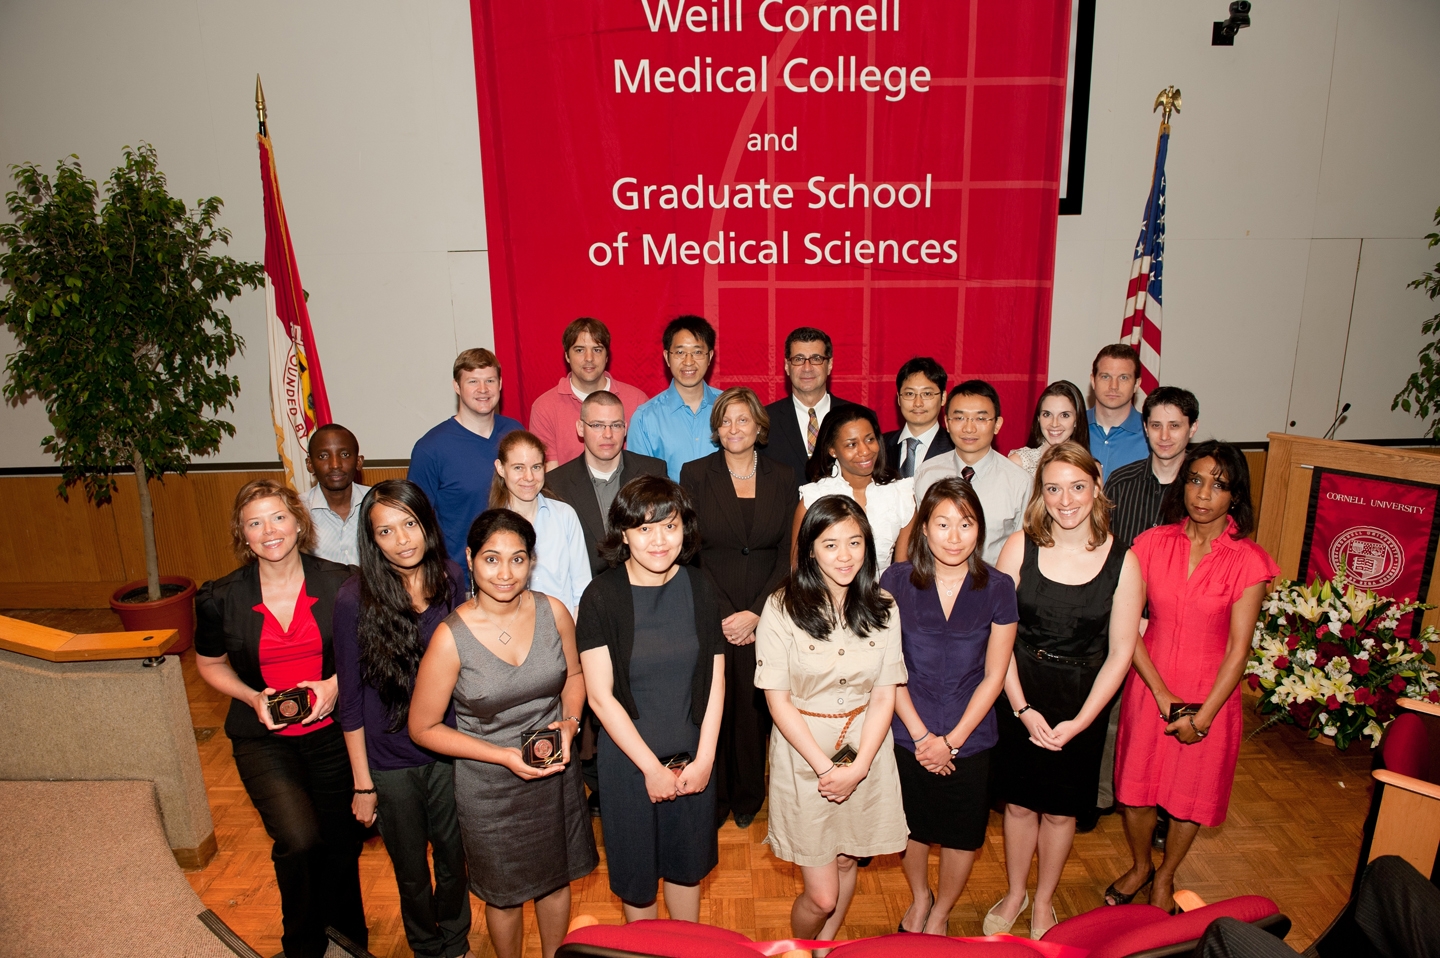 Graduate students honored at the annual Weill Cornell Medical College Graduate School of Medical Sciences Convocation